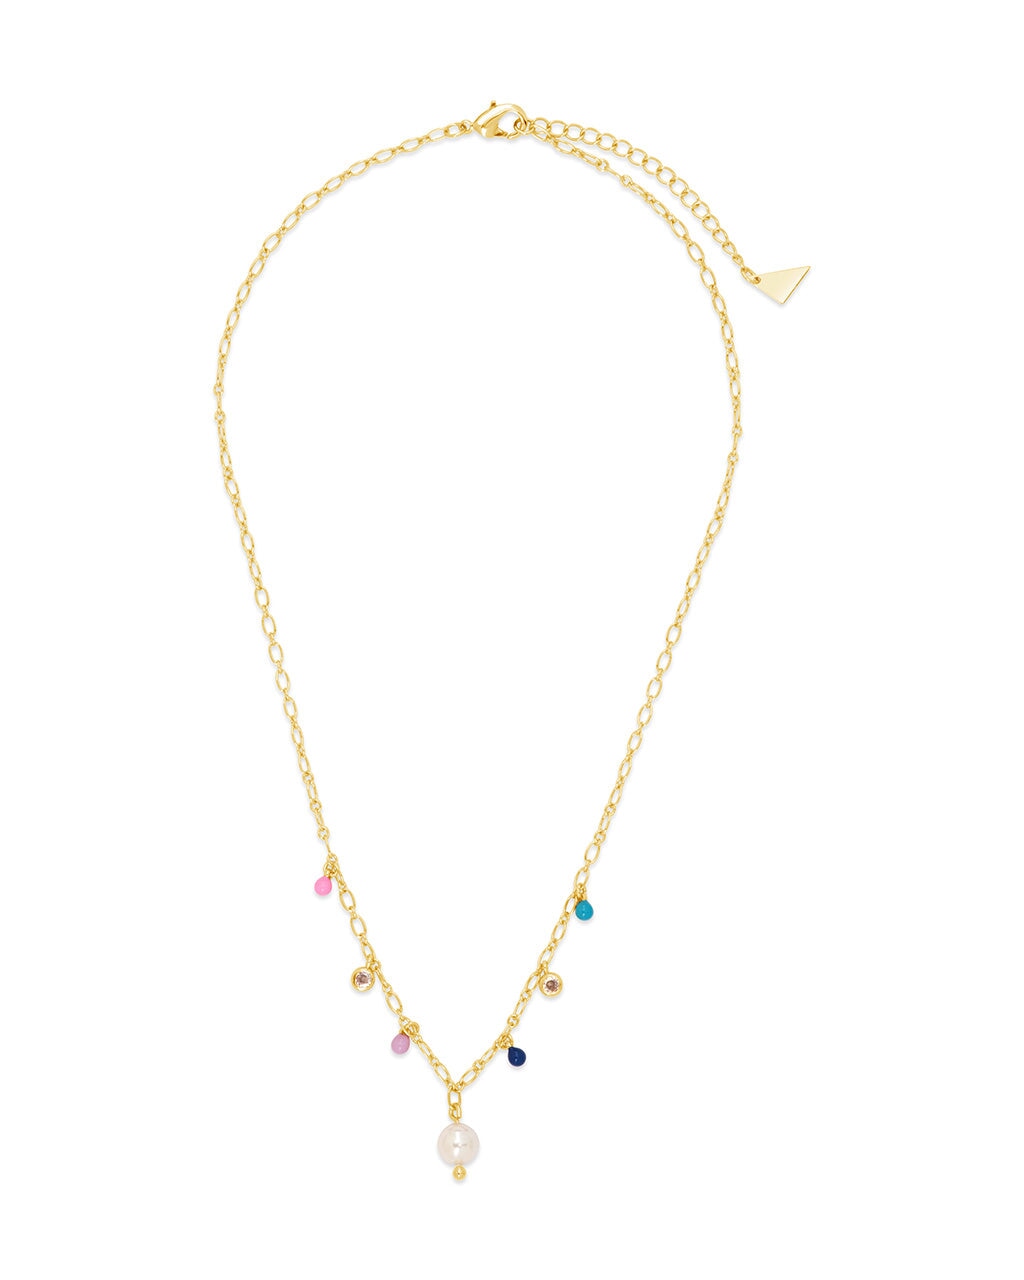 Enamel, Pearl, & CZ Charm Necklace Necklace Sterling Forever 